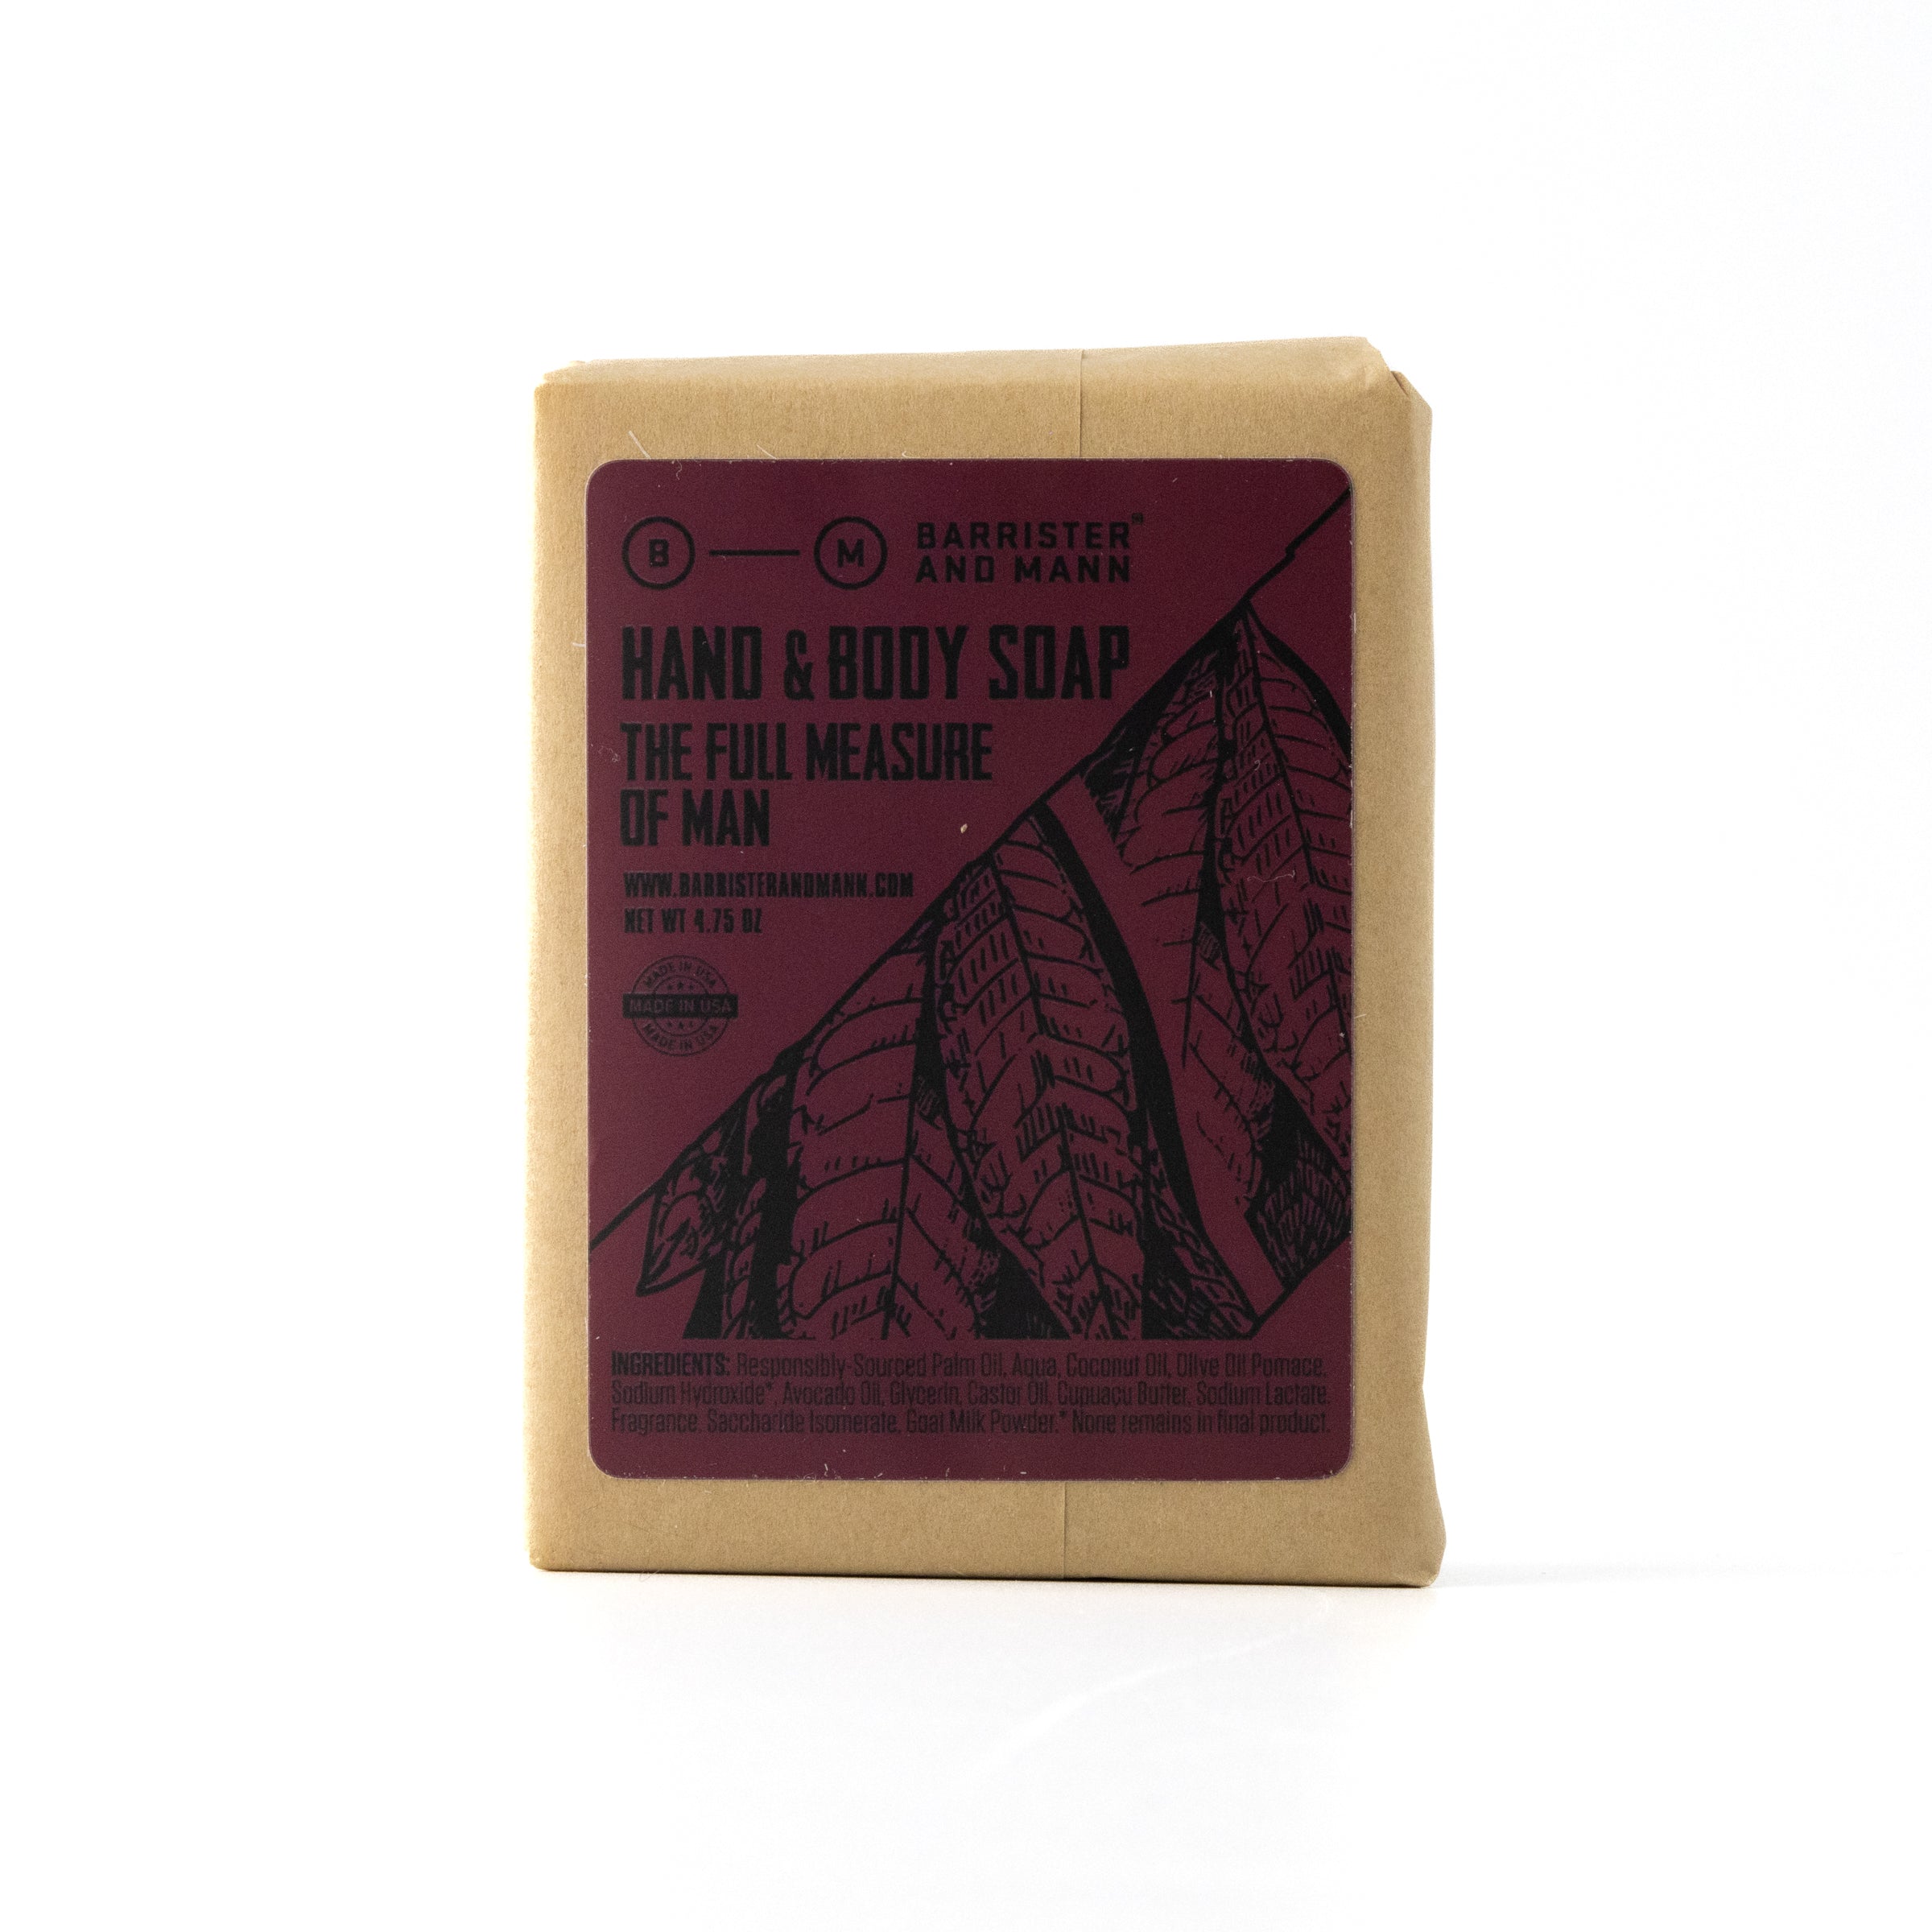 Hand & Body Soap: The Full Measure of Man - Barrister and Mann LLC